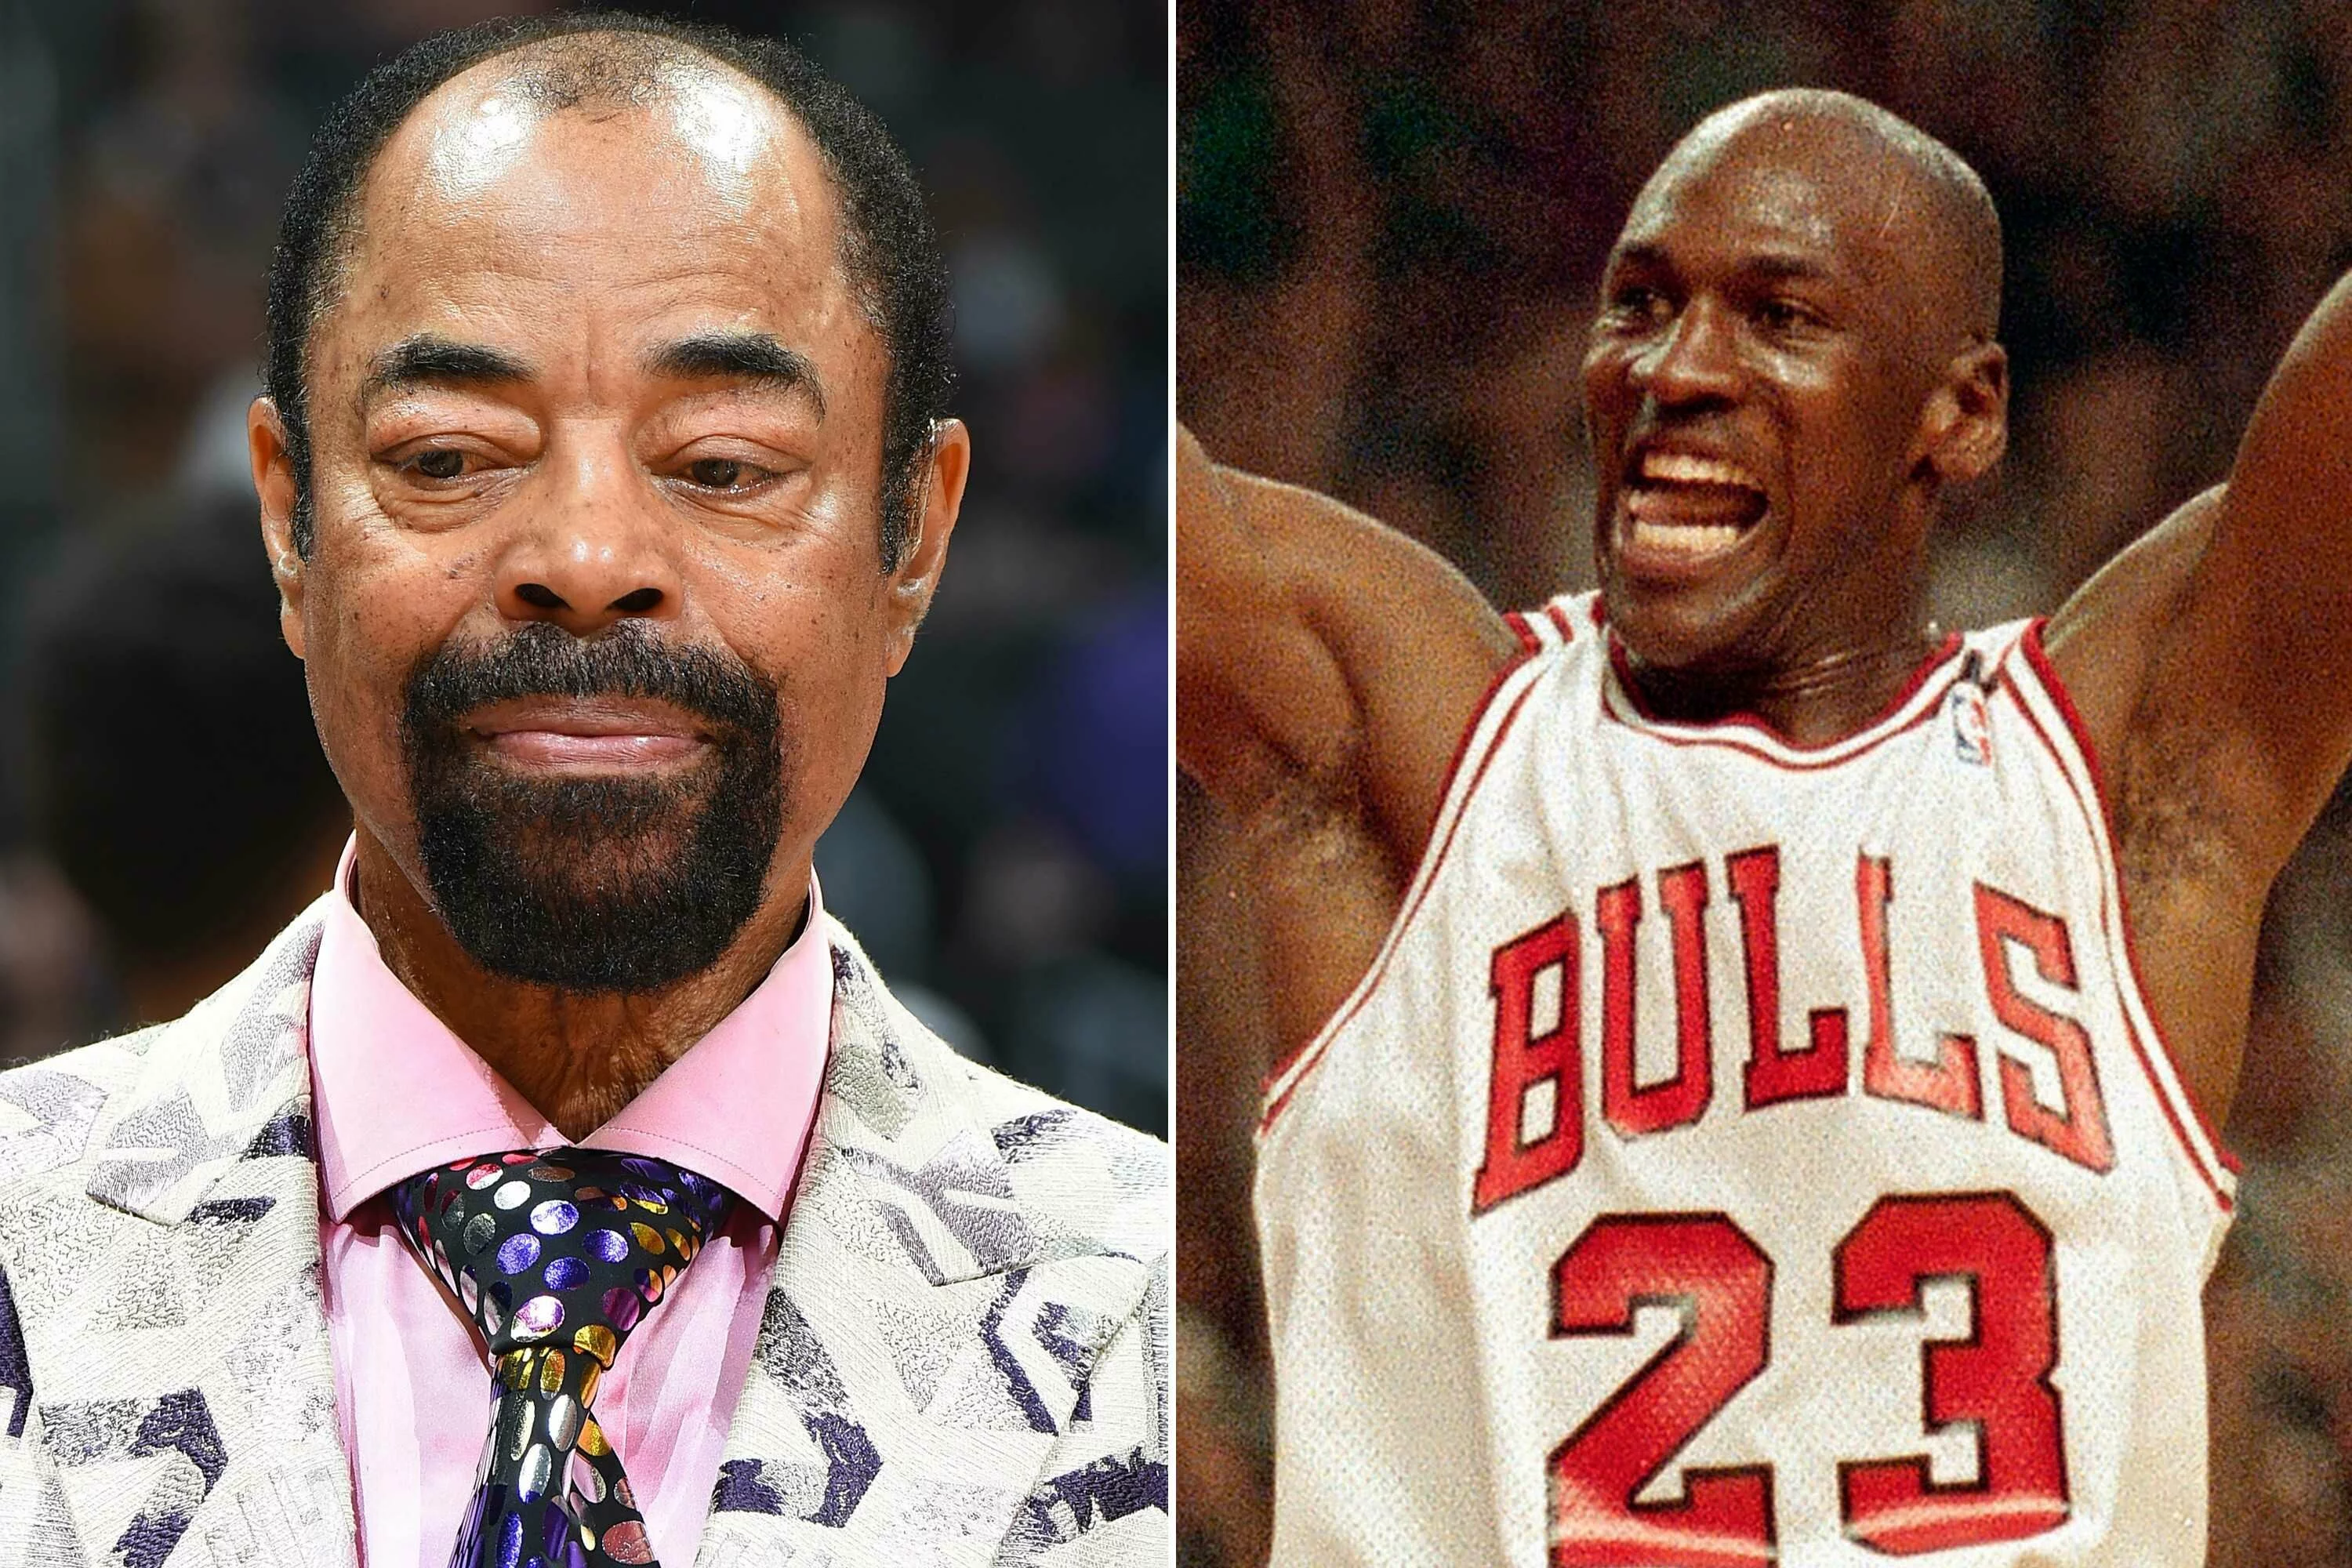 Knicks legend Walt Frazier doesn’t remember making this remark about Michael Jordan in 1984, but he isn’t surprised he did. 